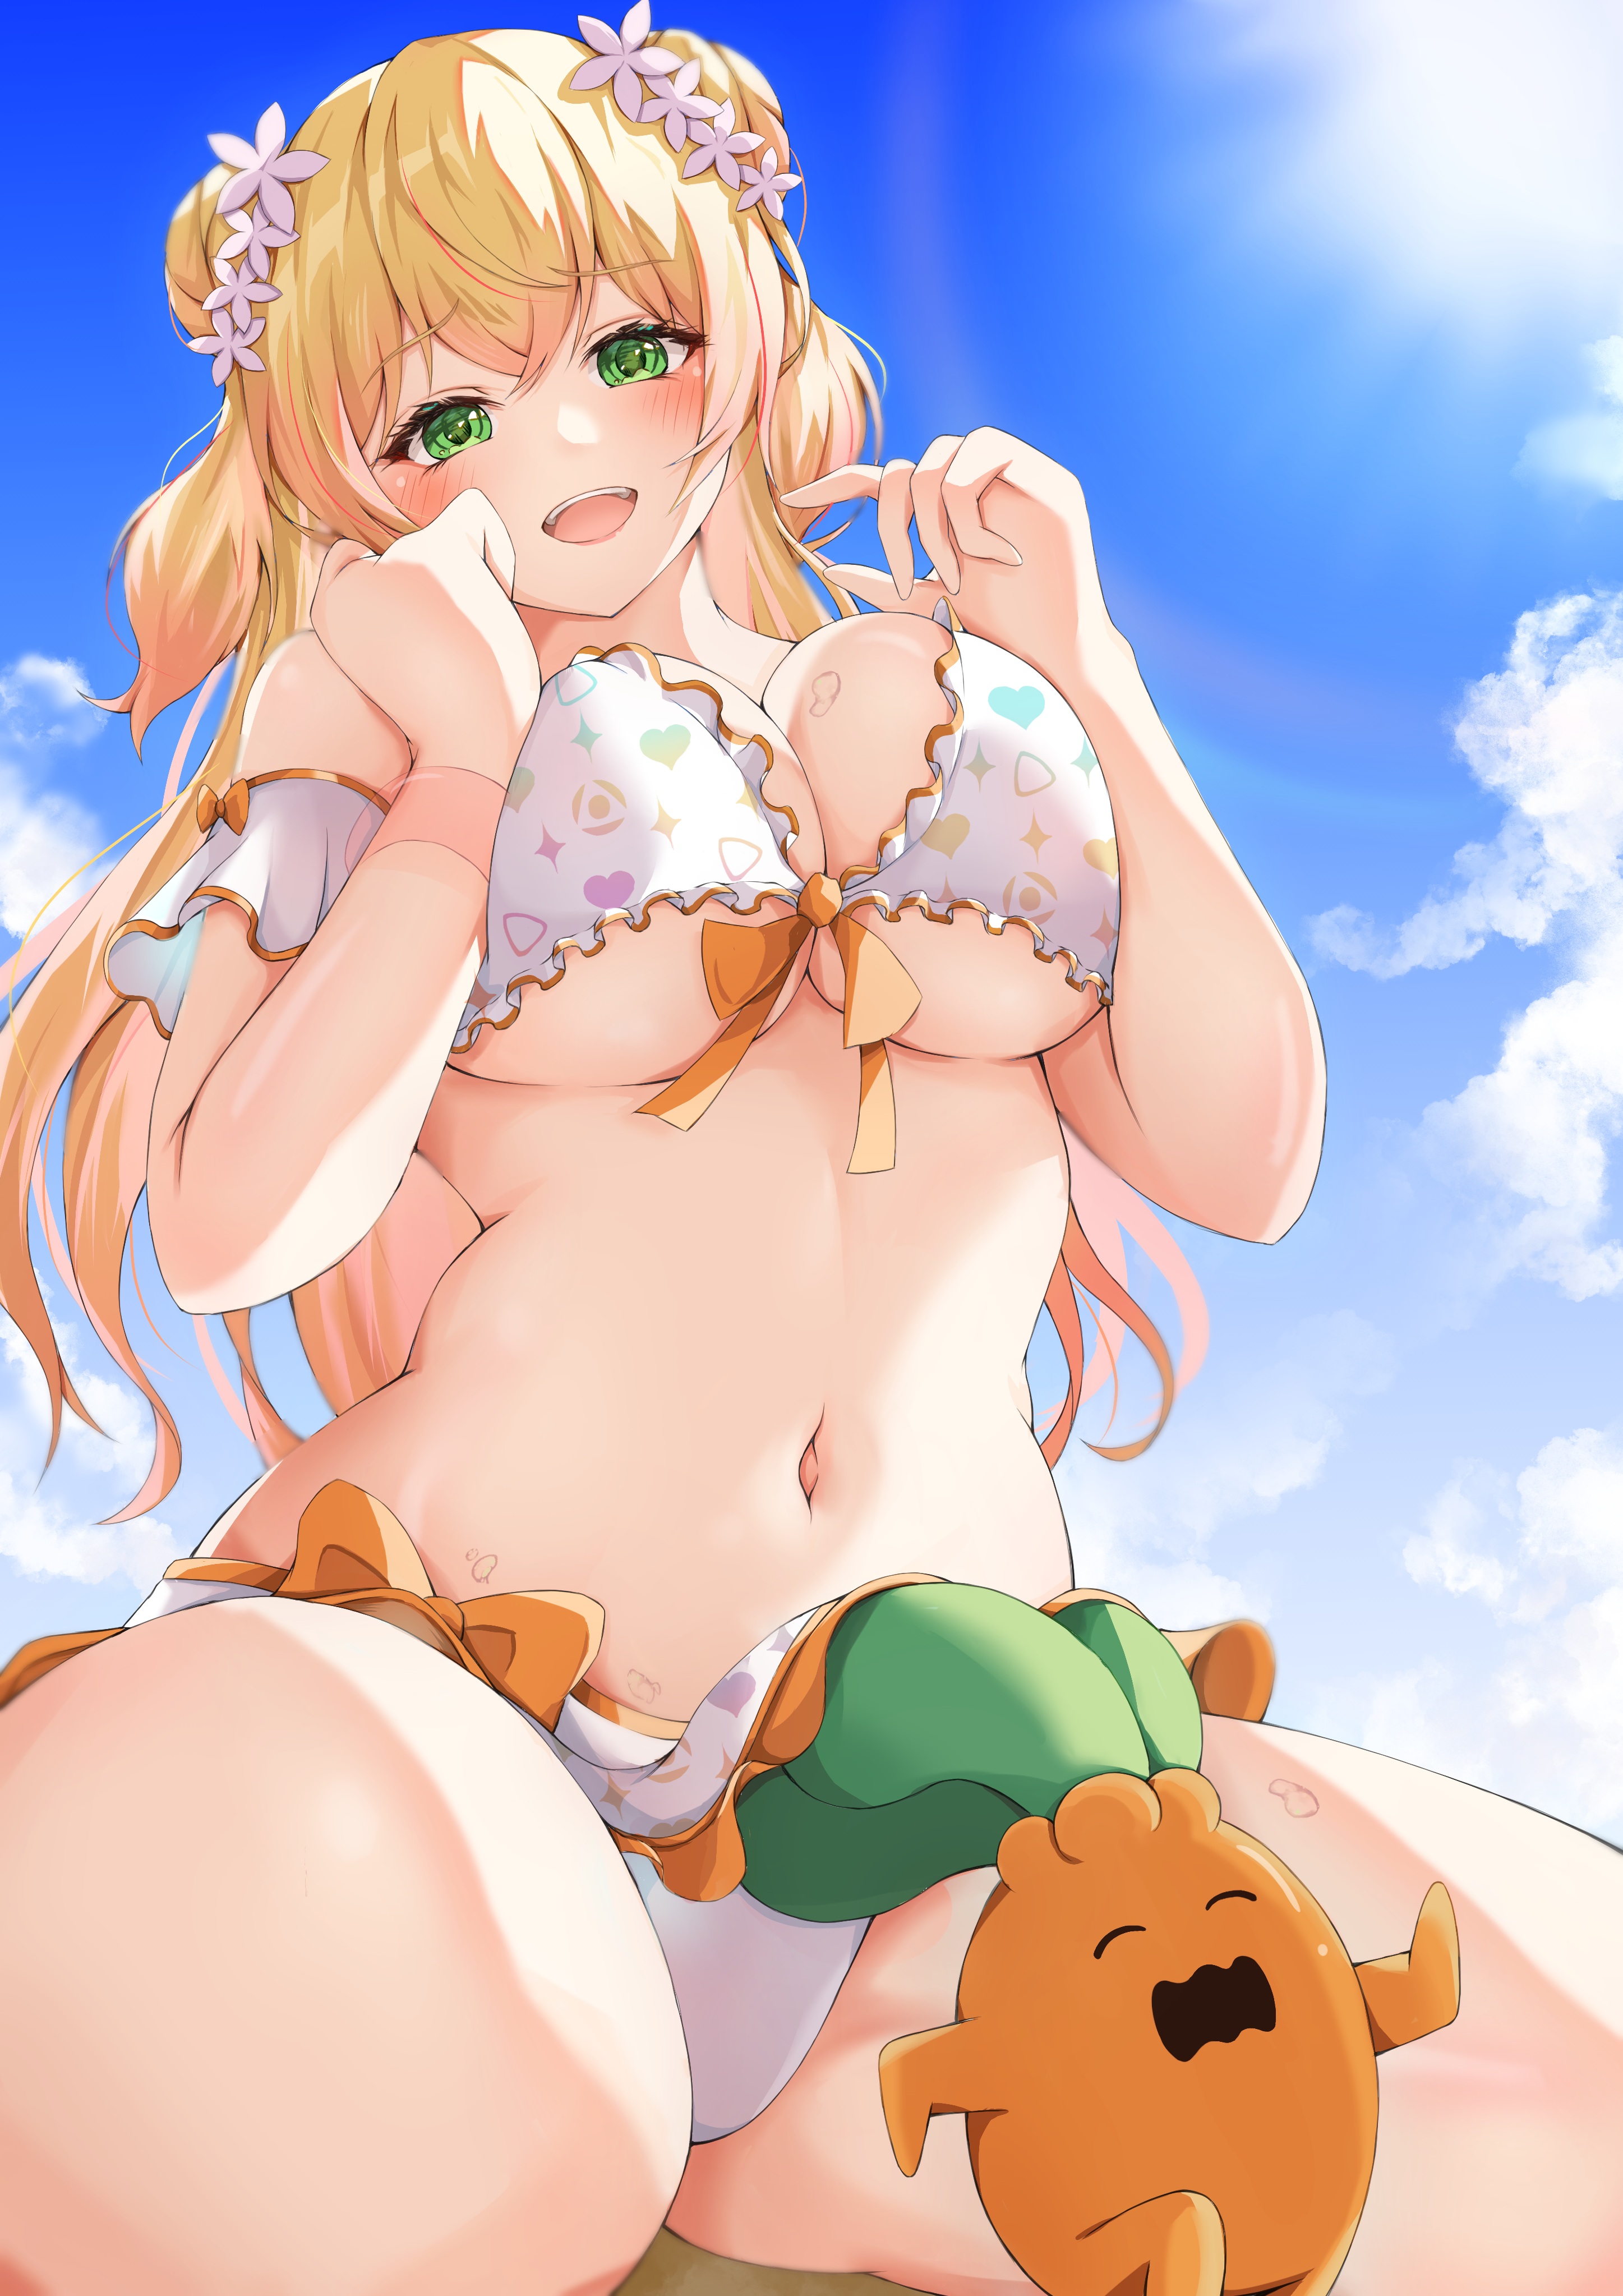 Anime 2894x4093 anime anime girls squeezing breast happy bikini big boobs blonde green eyes flower in hair pushing breasts together looking at viewer smiling